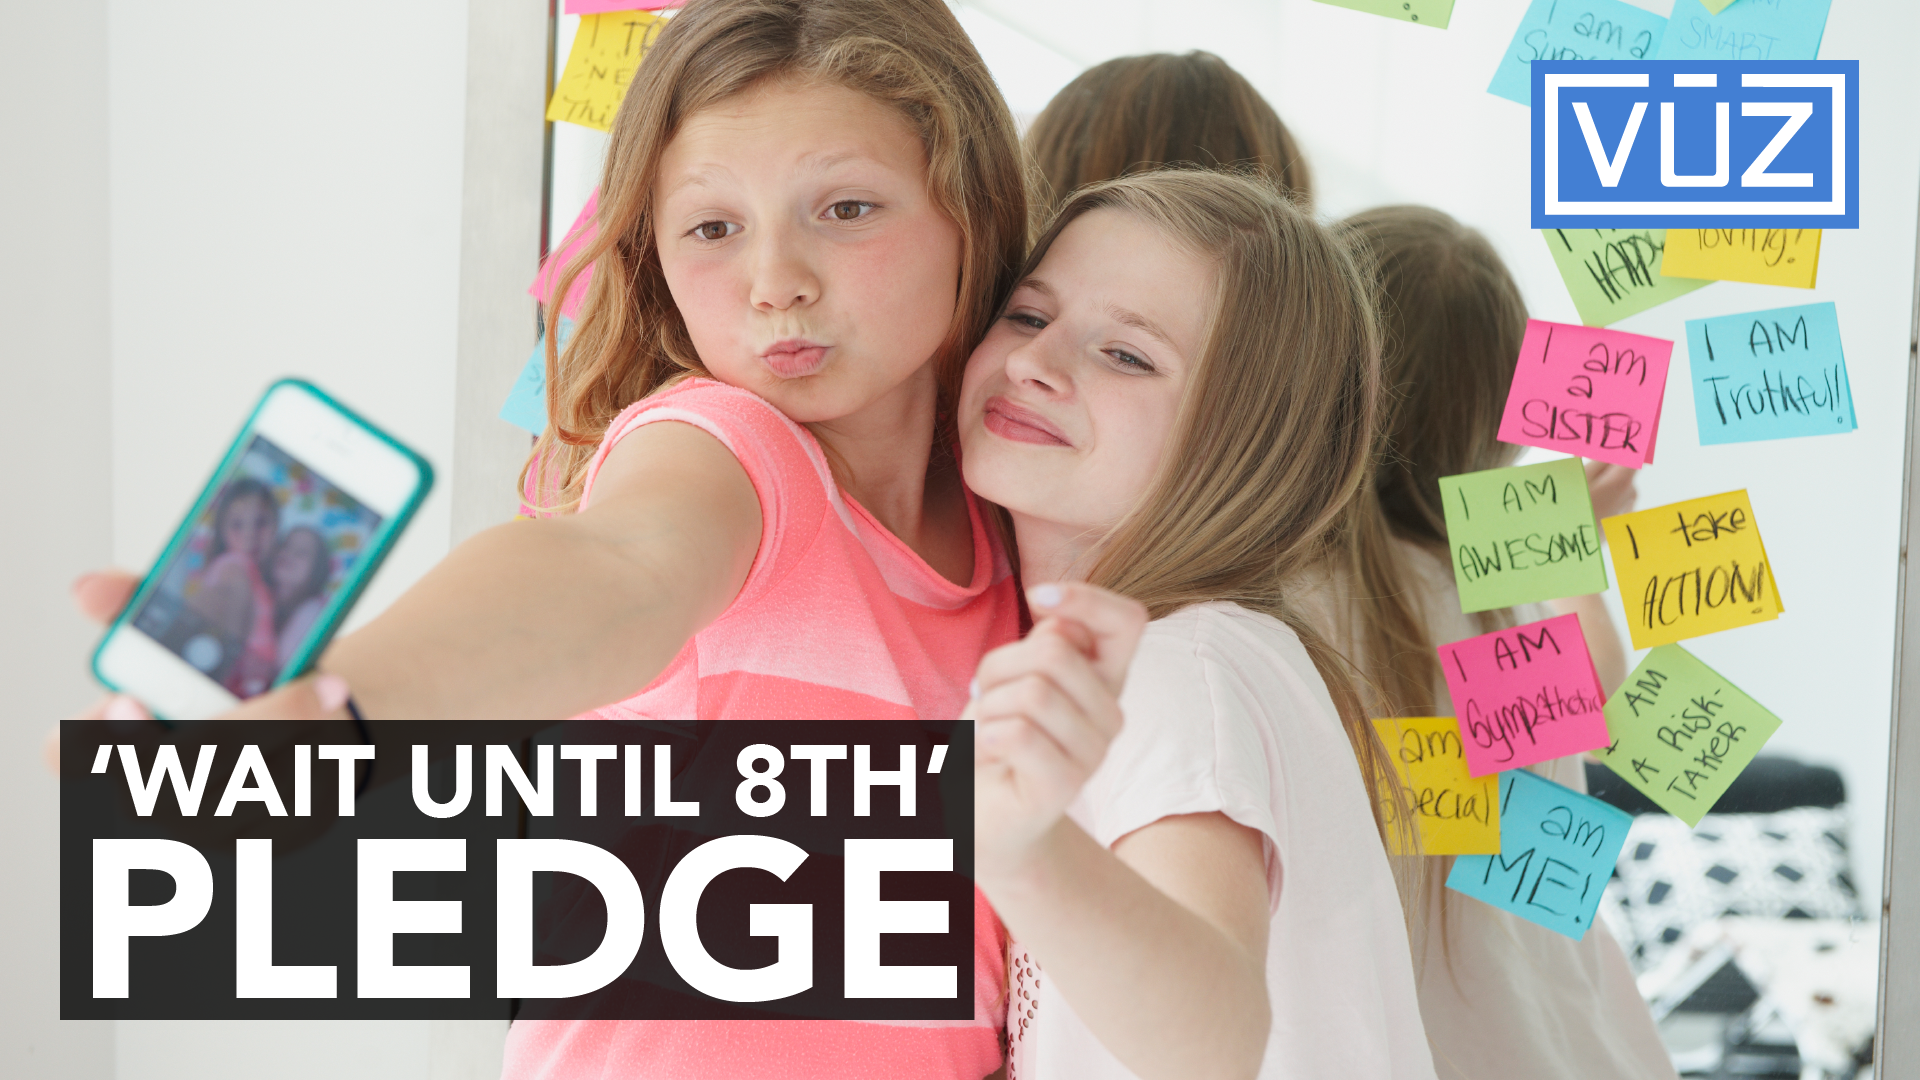 ’Wait Until 8th’ pledge asks parents to hold off on giving smartphones to kids